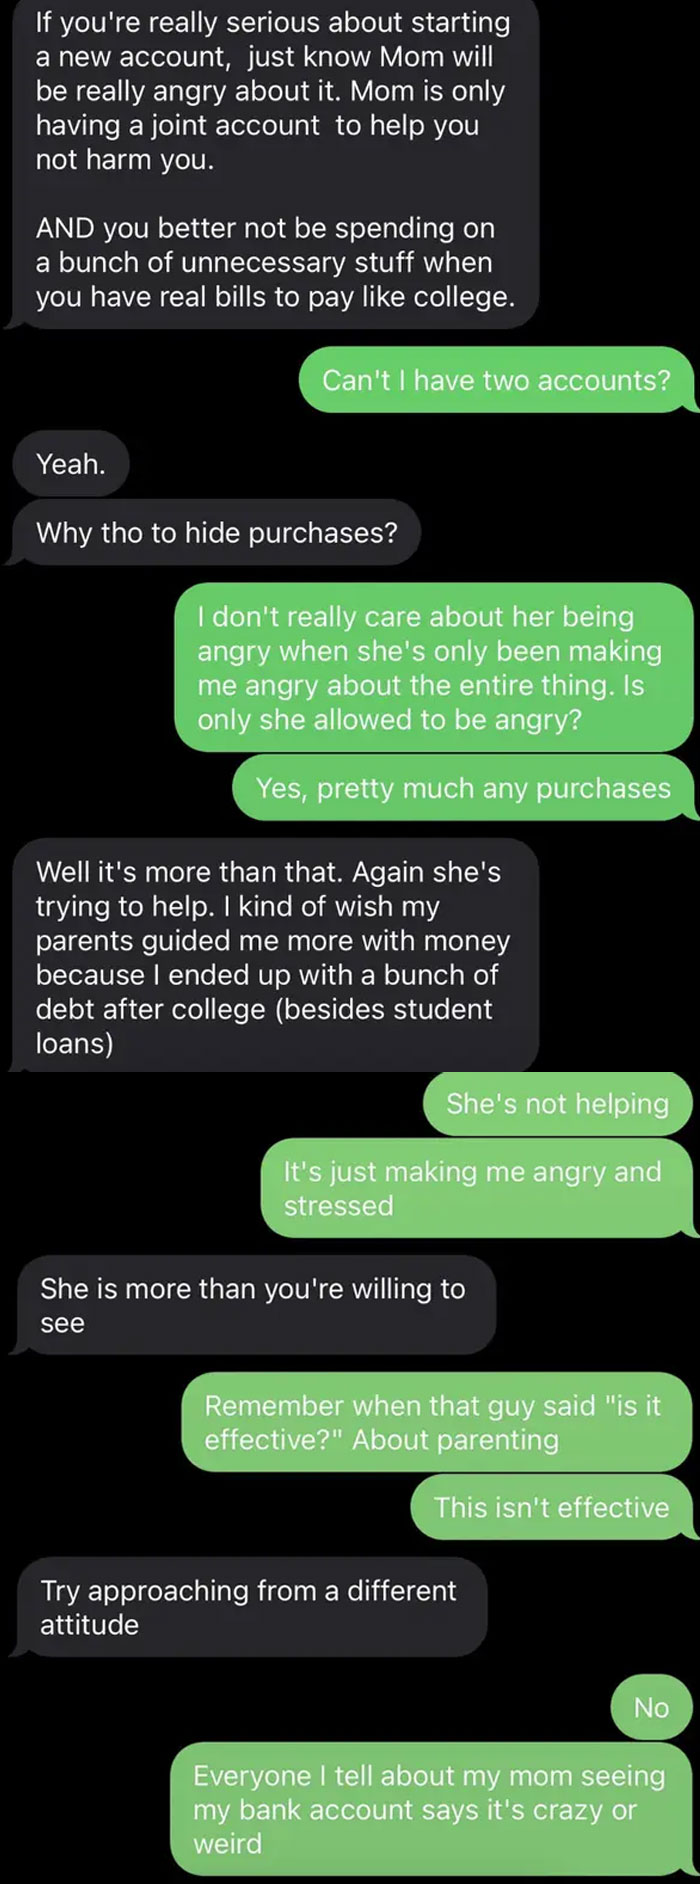 I Need More Opinions. I'm 22 F Living On My Own And My Parents Still Want To Have Control On What I Buy. It Is Not Making Me Any More Frugal When She Yells At Me For Spending Too Much